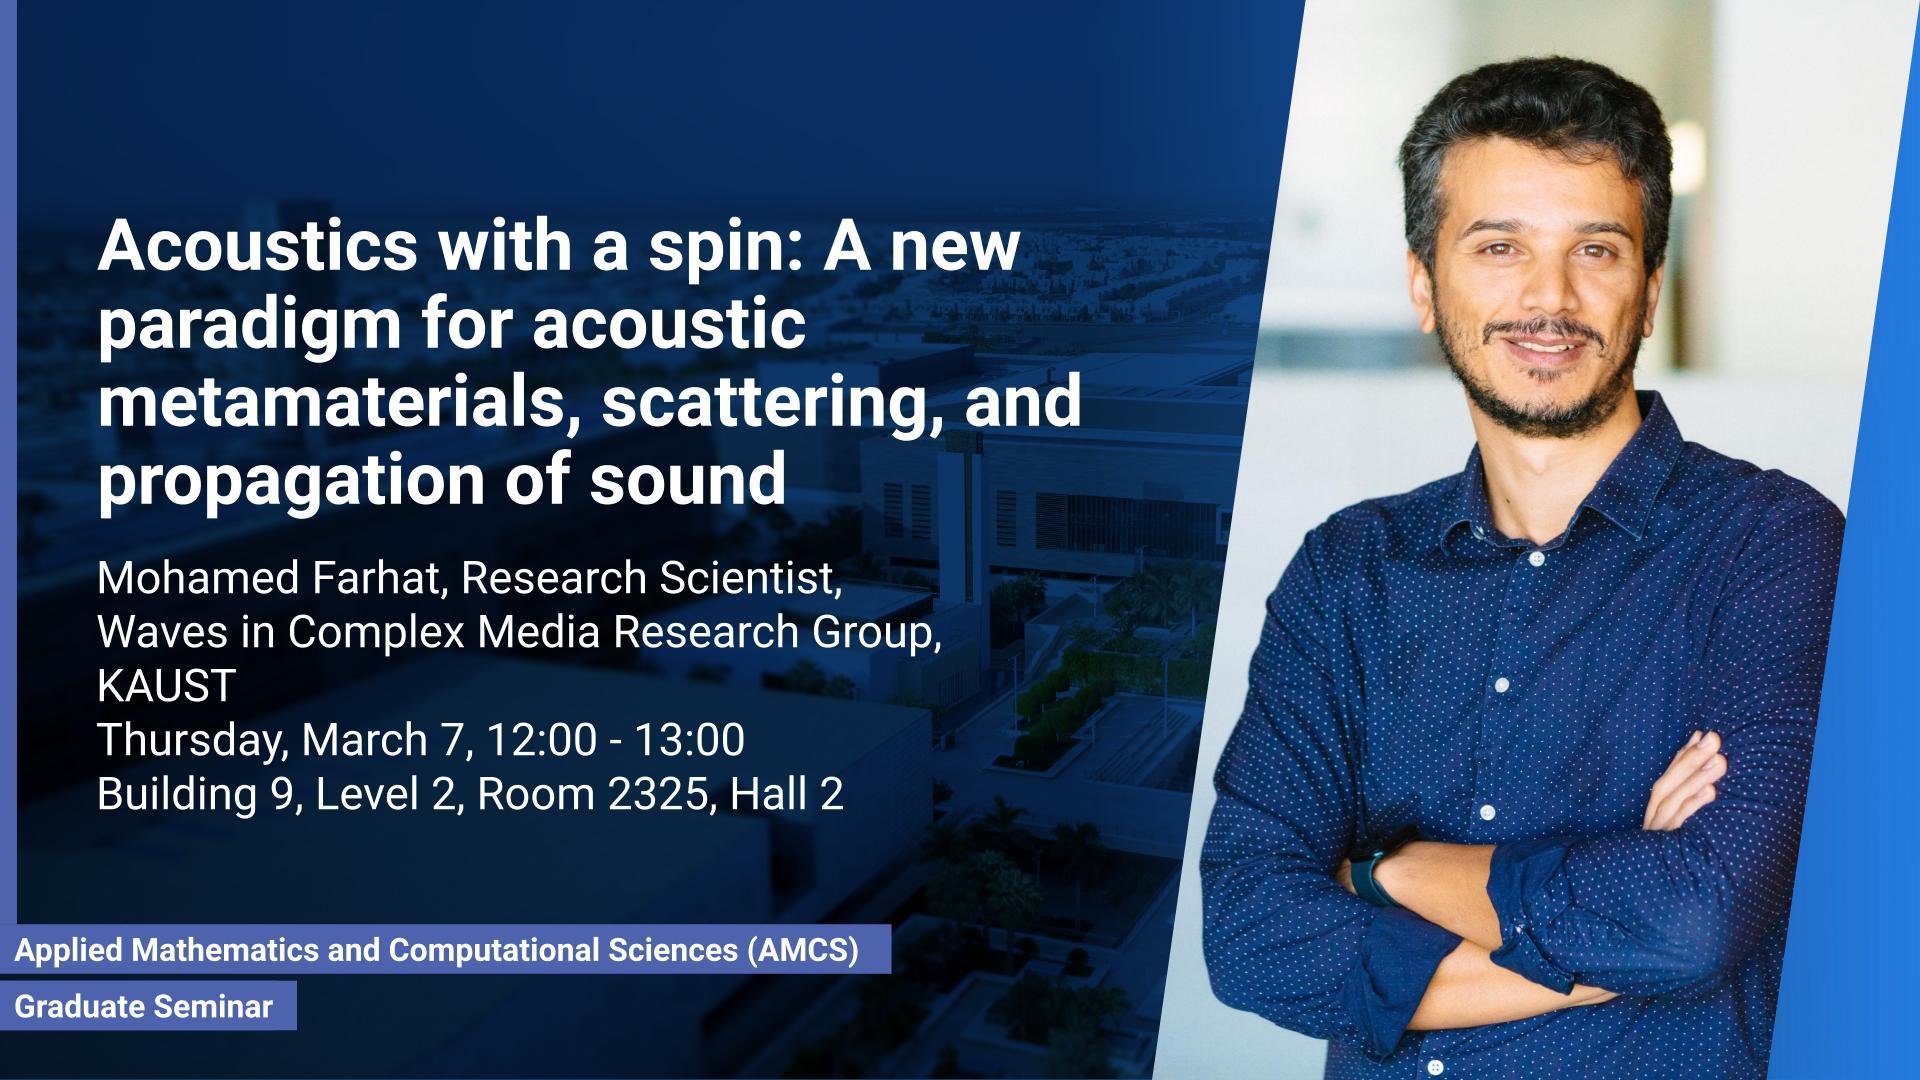 KAUST-CEMSE-AMCS-STAT-Graduate-Seminar-Mohamed-Farhat-Acoustics with a spin A new paradigm for acoustic metamaterials, scattering, and propagation of sound.jpg